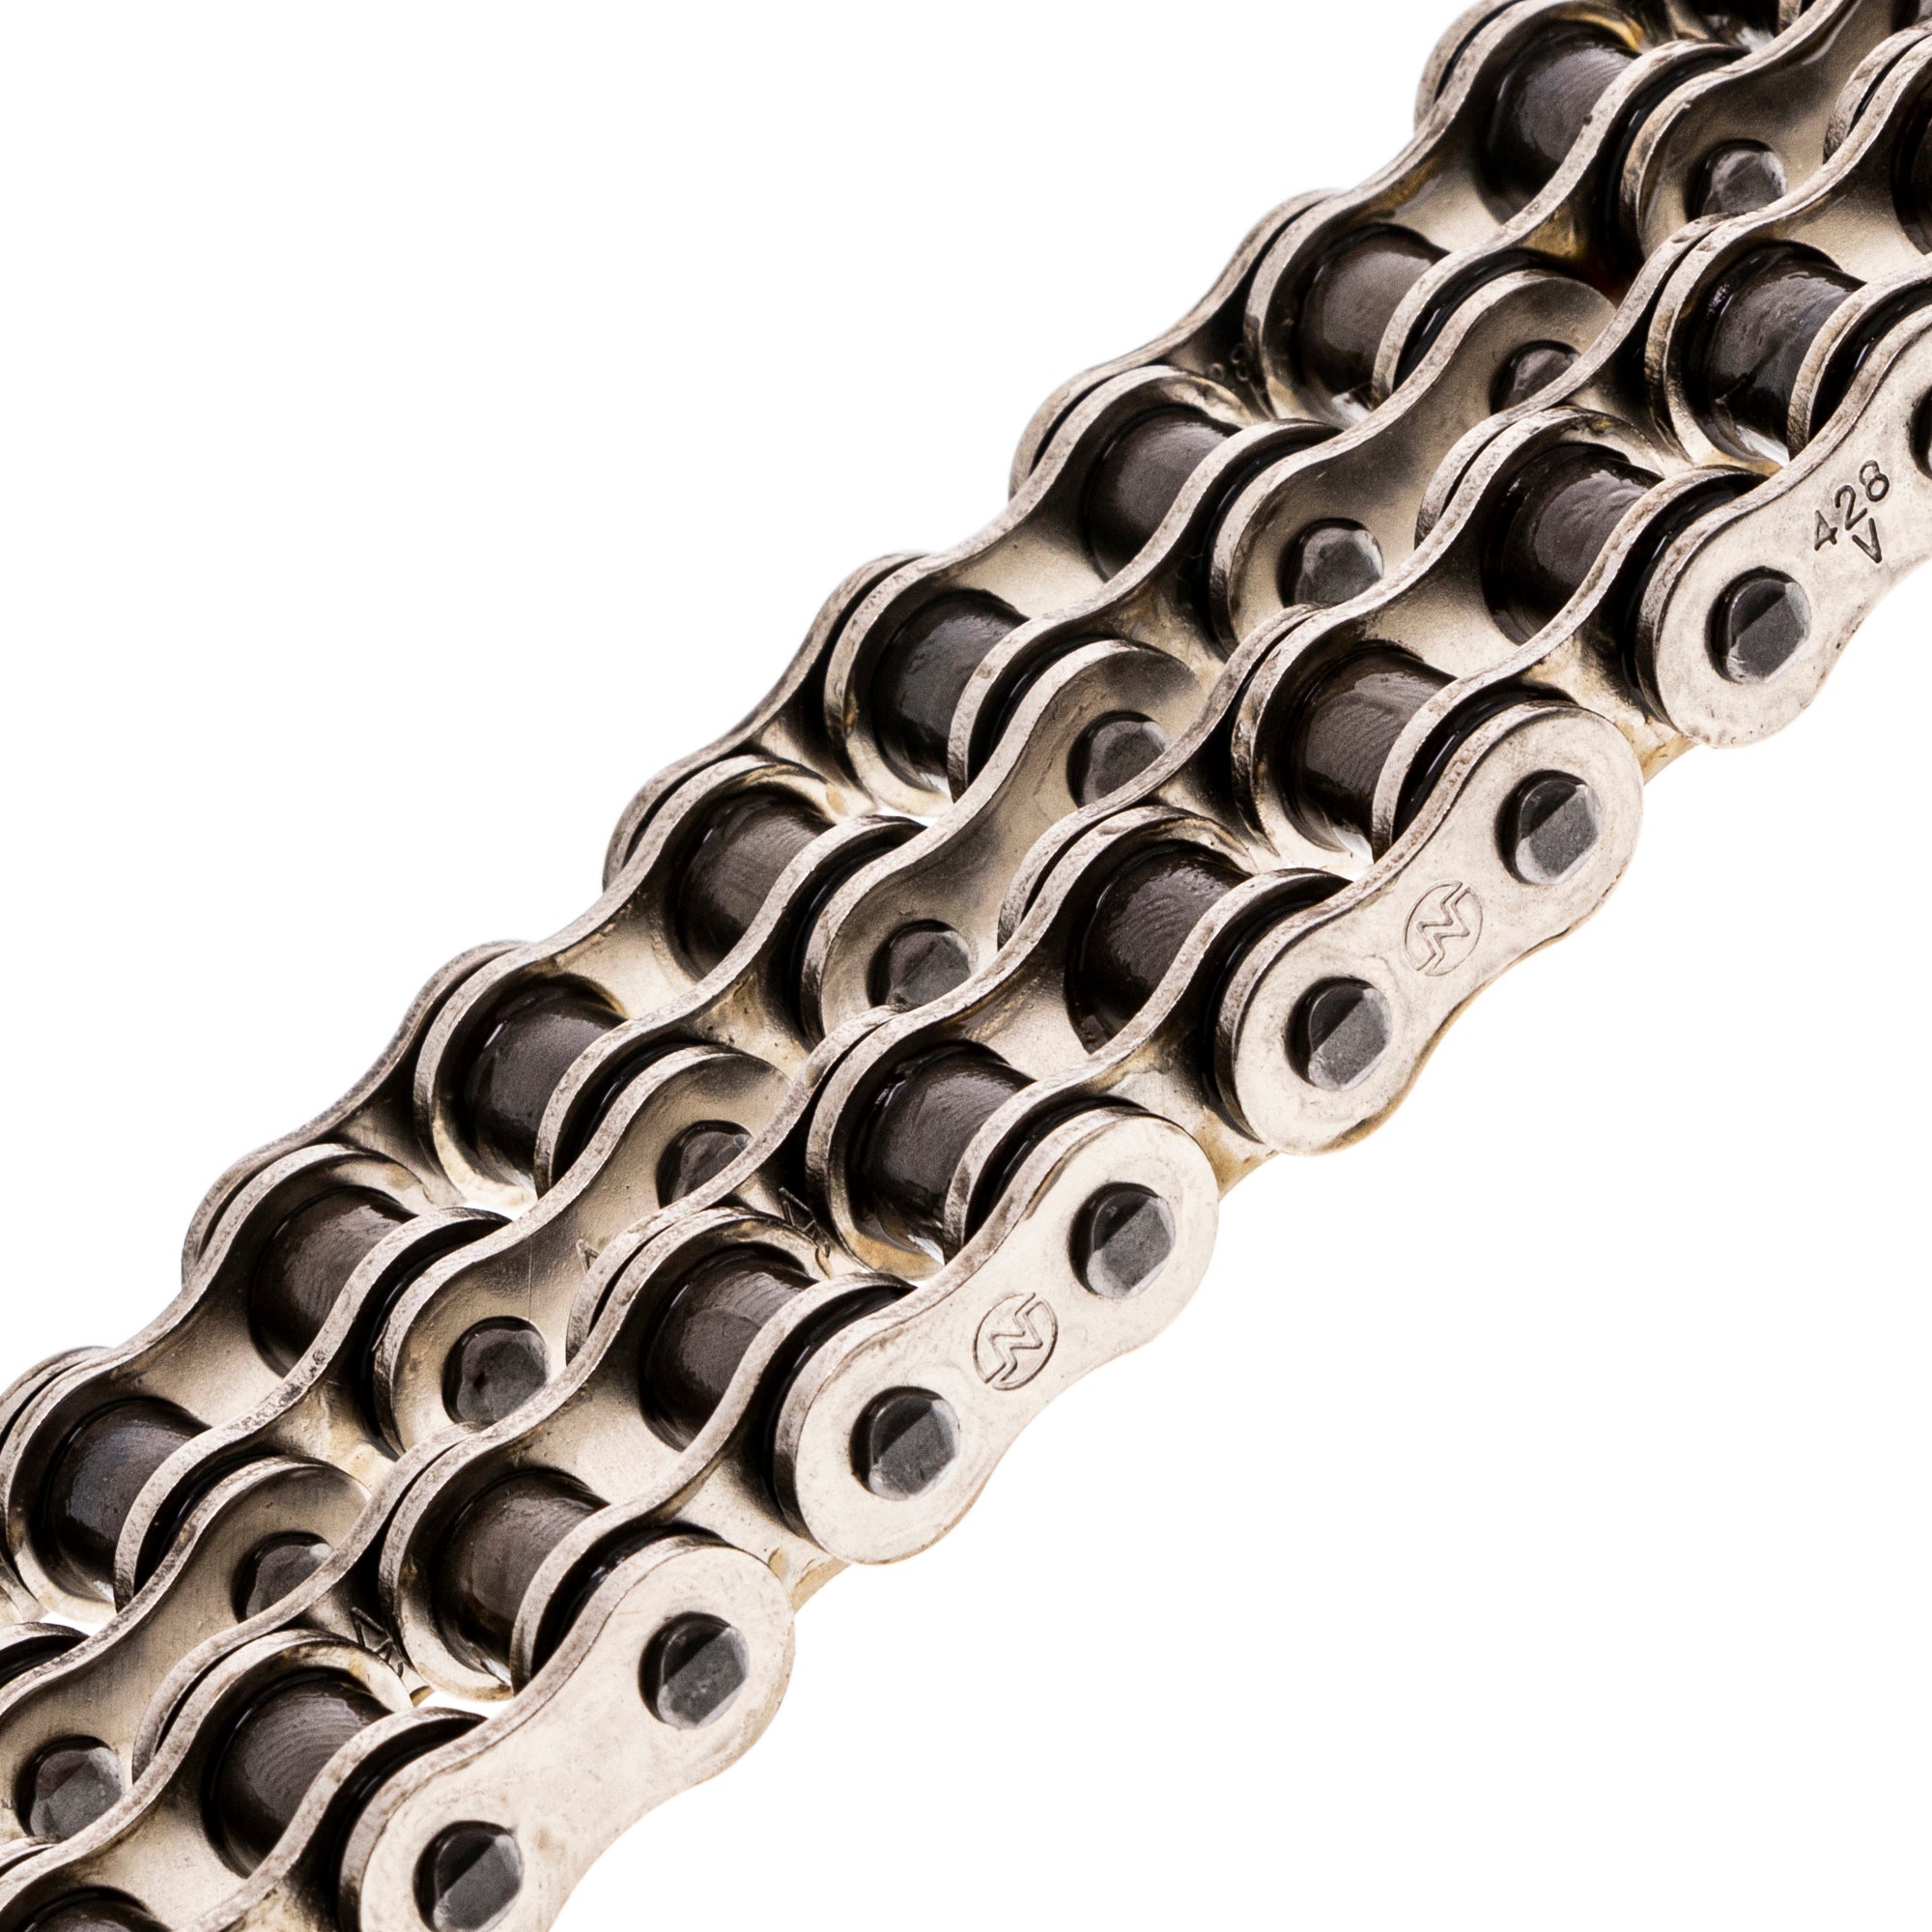 Drive Chain 108 O-Ring w/ Master Link for zOTHER YZ80 XL100S Trail KX65 5303 NICHE 519-CDC2314H